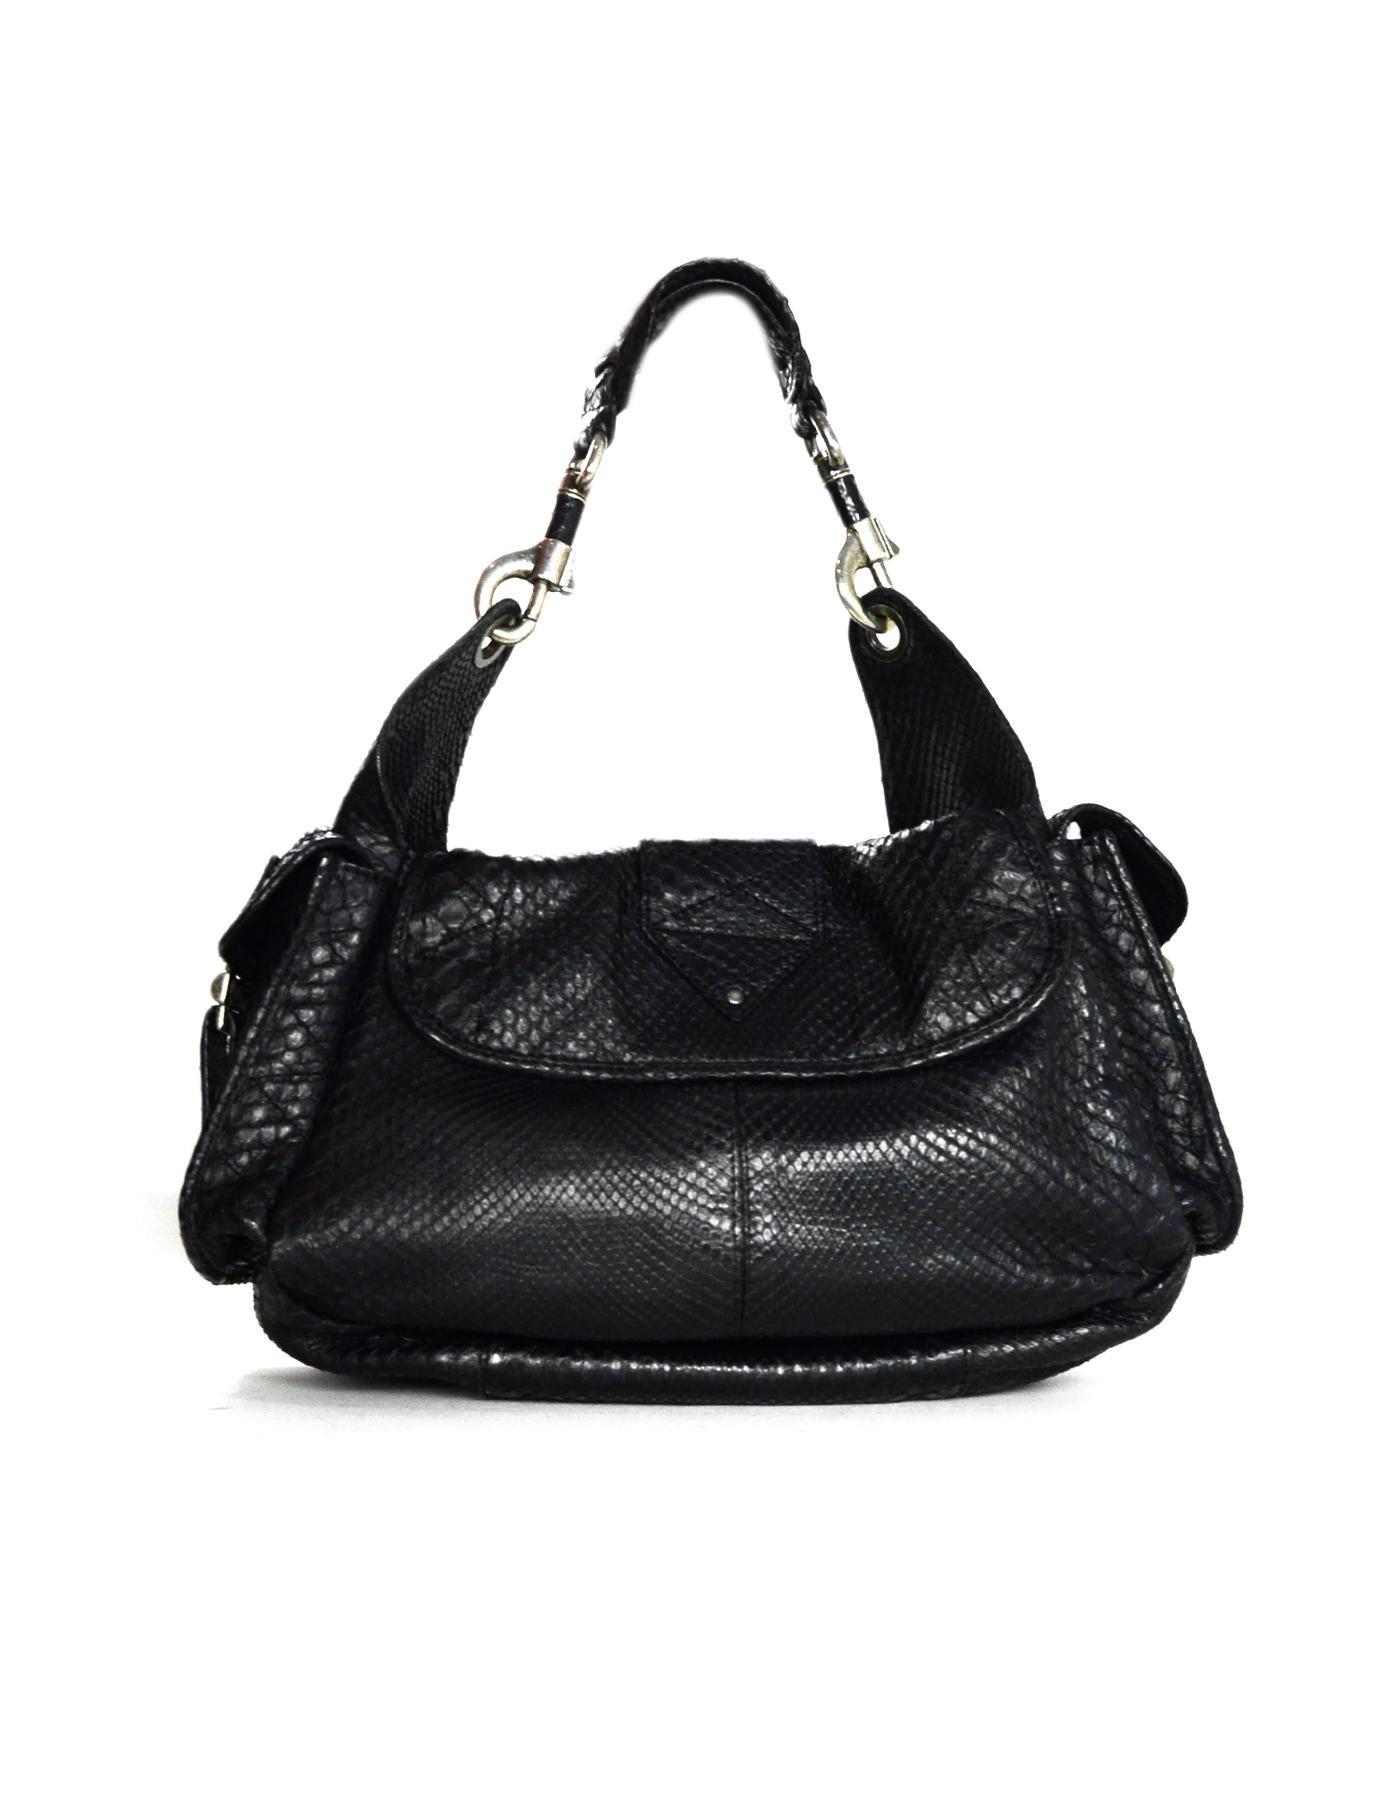 Christian Dior Limited Edition Black Python Shoulder Bag w/ Side Pockets In Excellent Condition In New York, NY